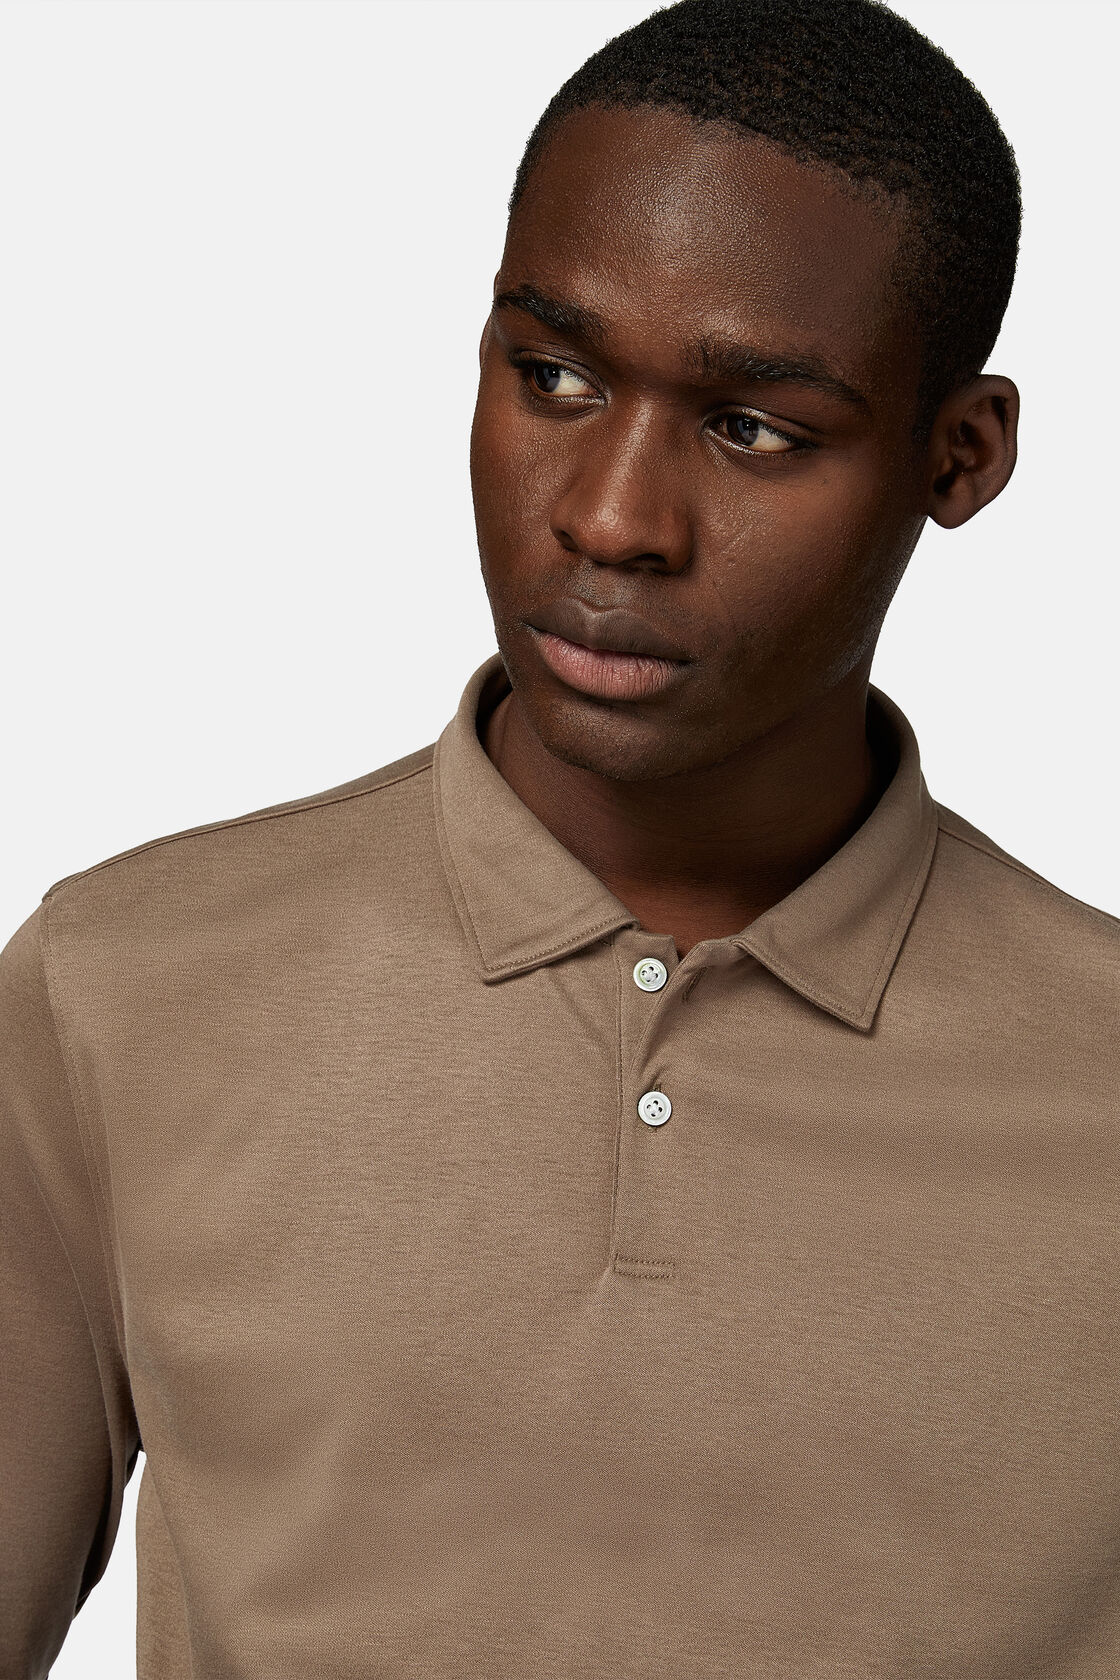 Polo Shirt in a Cotton Blend High-Performance Jersey Regular, Brown, hi-res